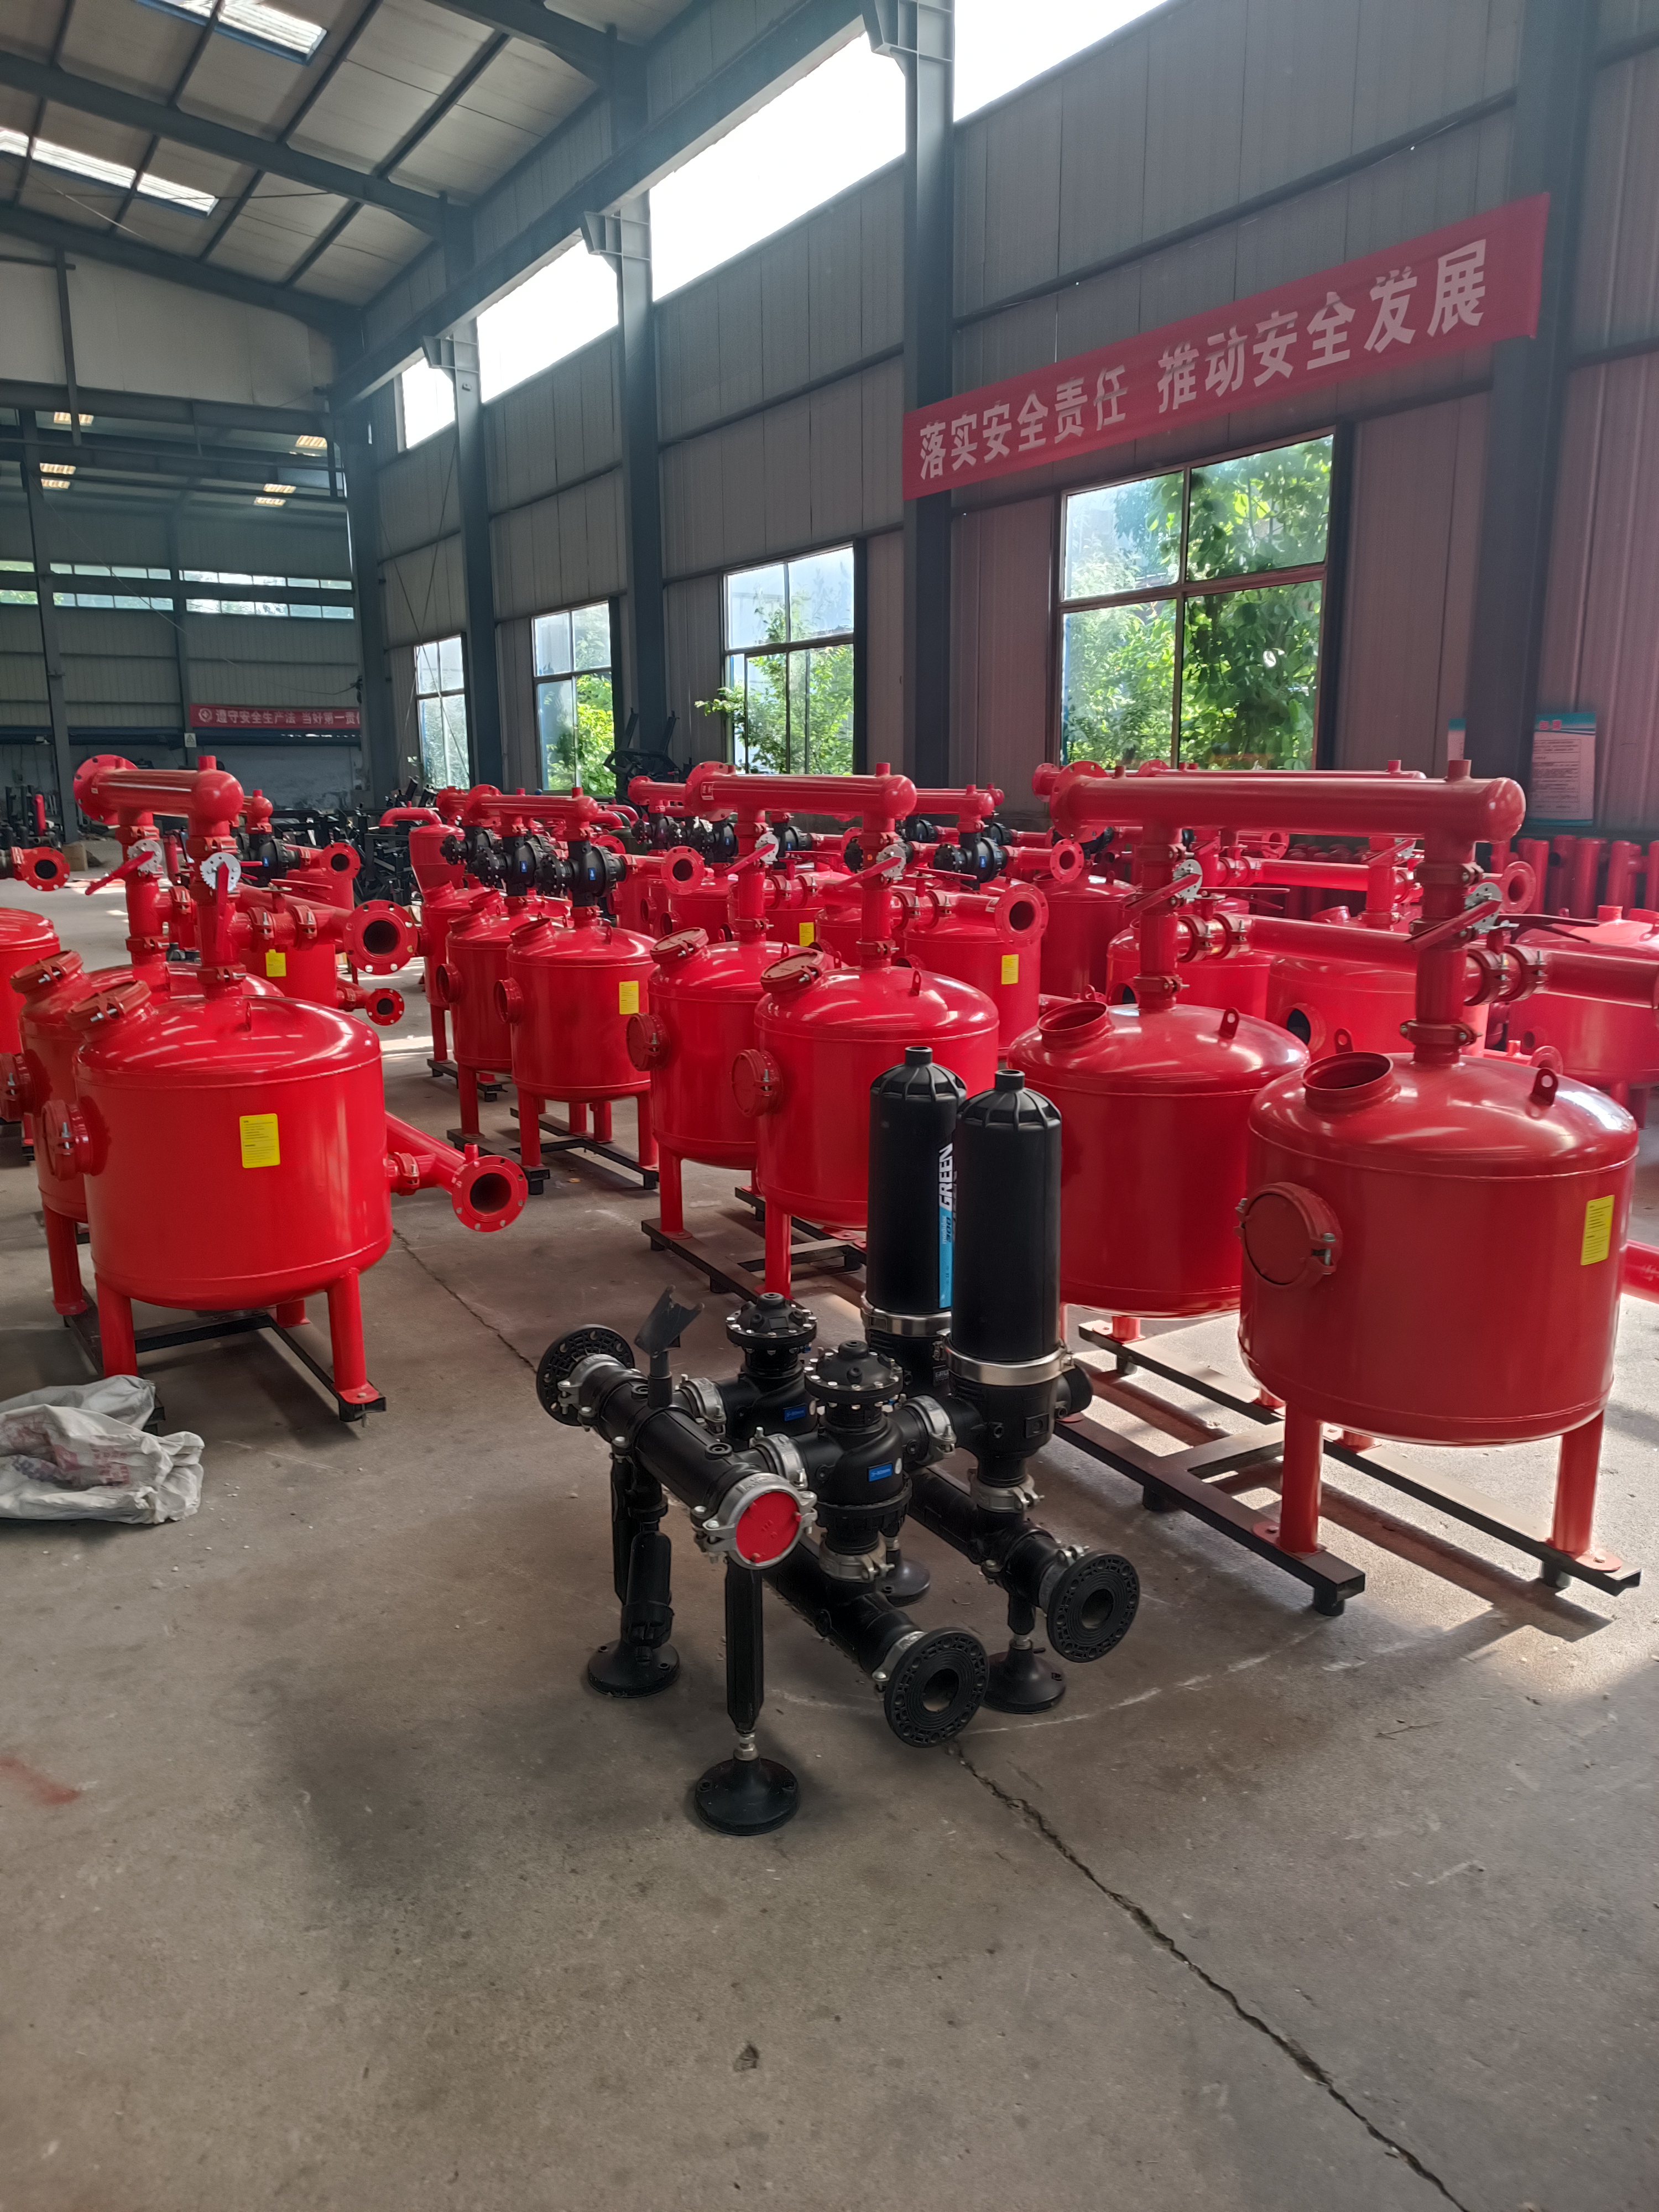 Sand and gravel filter, fully automatic backwashing, quartz sand laminated centrifugal irrigation equipment, agricultural river water, well water filtration